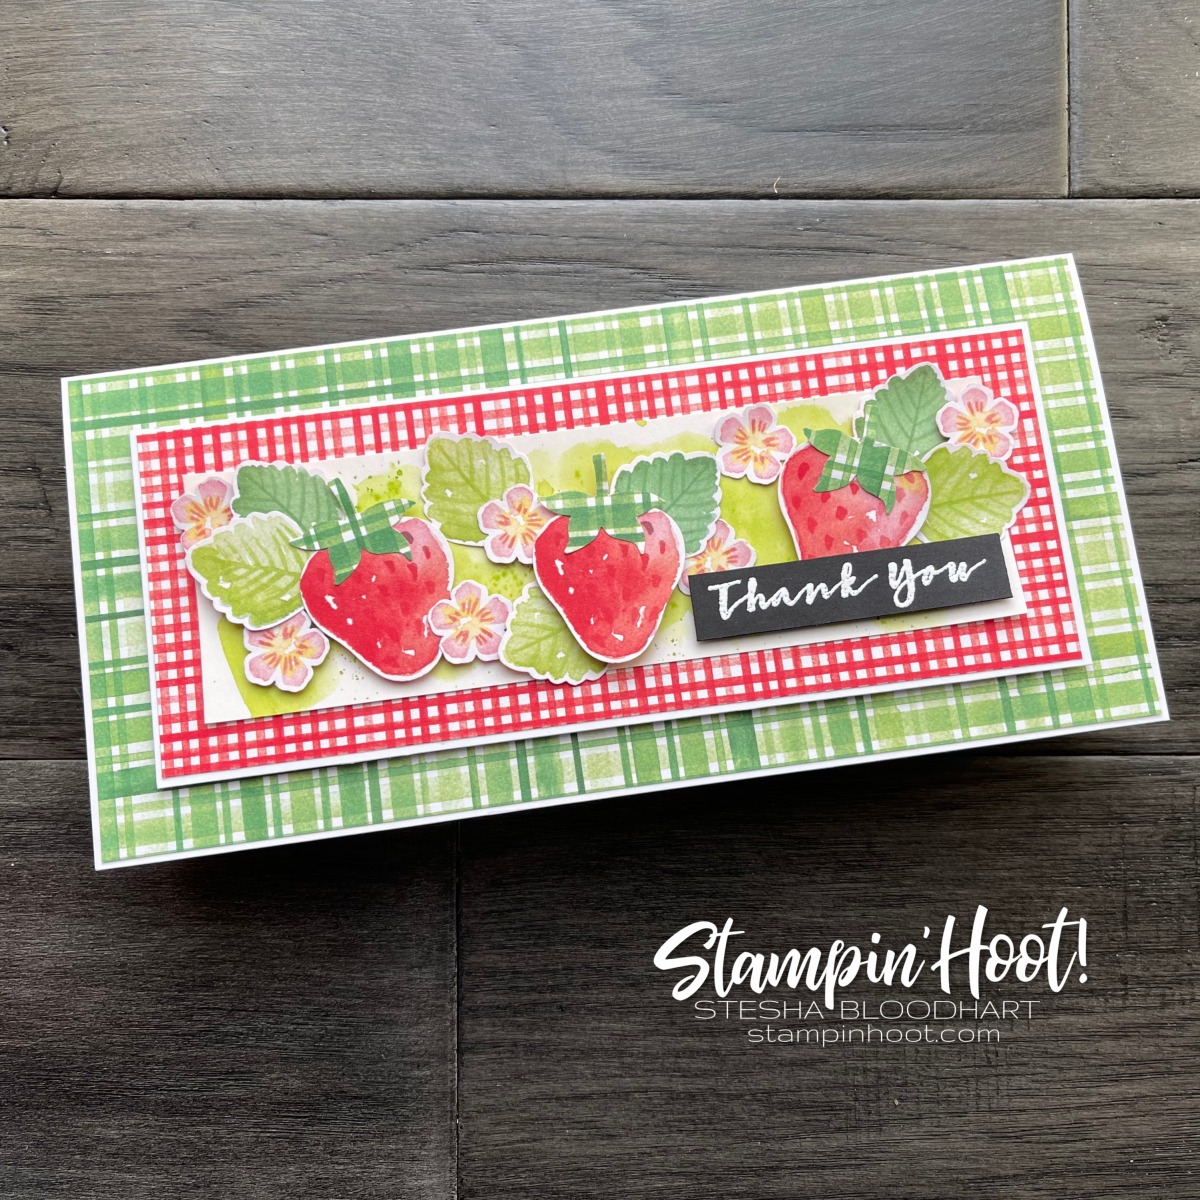 Berry Blessings Stamp Set & Berry Delightful DSP FREE With $100 Purchase - Card by Stesha Bloodhart, Stampin' Hoot! Thank You Slimline Card